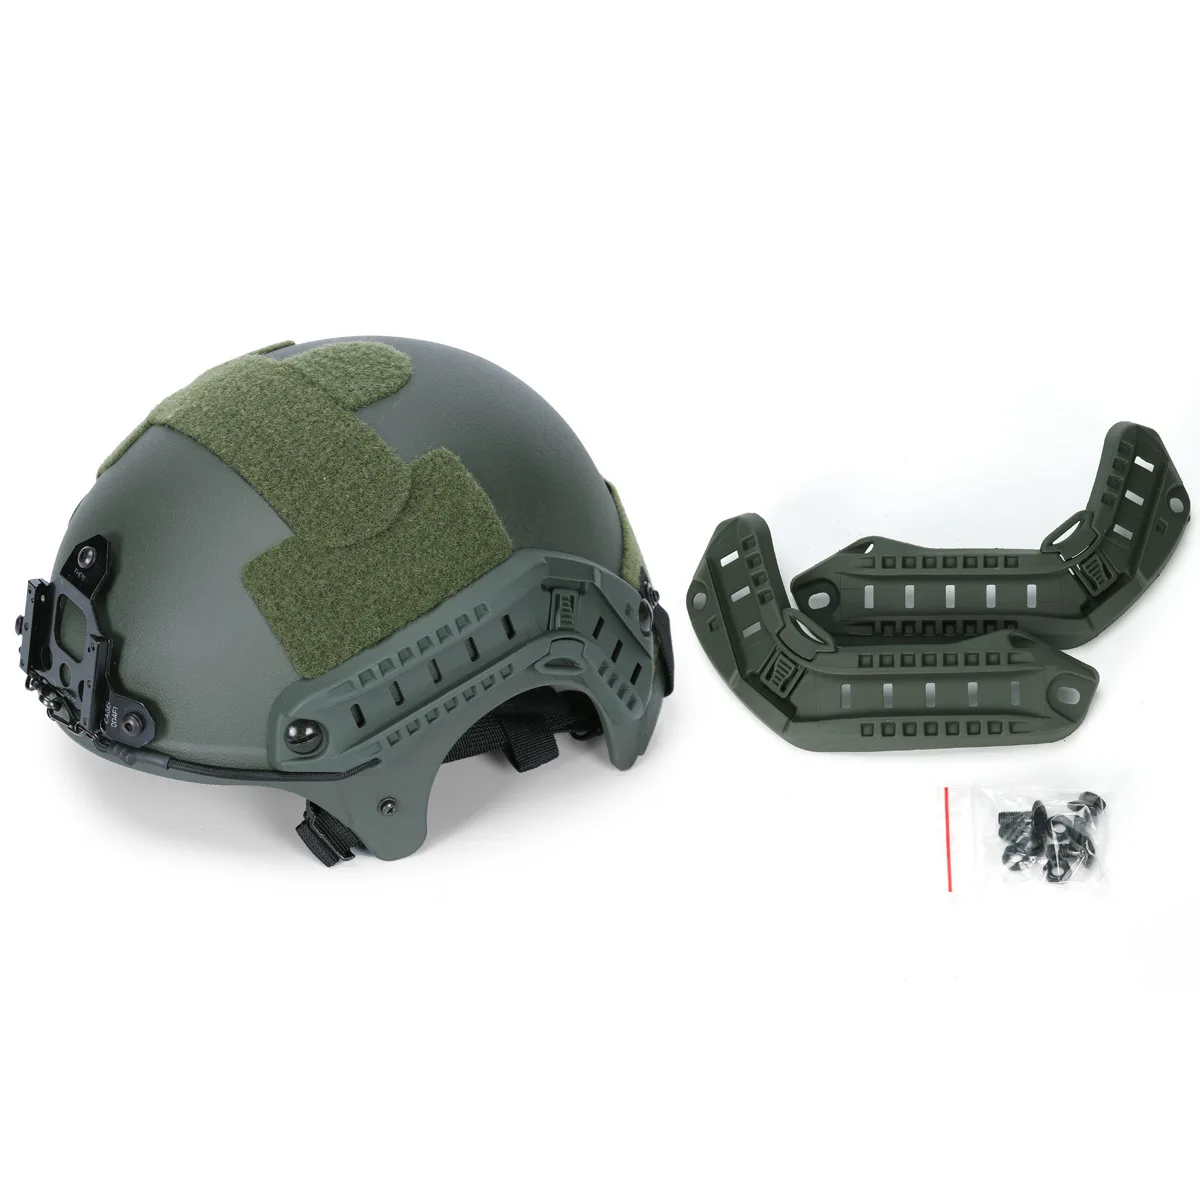 

Tactical Gear FAST Helmet Accessory ACH-MICH ARC Helmet Guide Rail Mount Adapter Airsoft Paintball Safety Side Rail